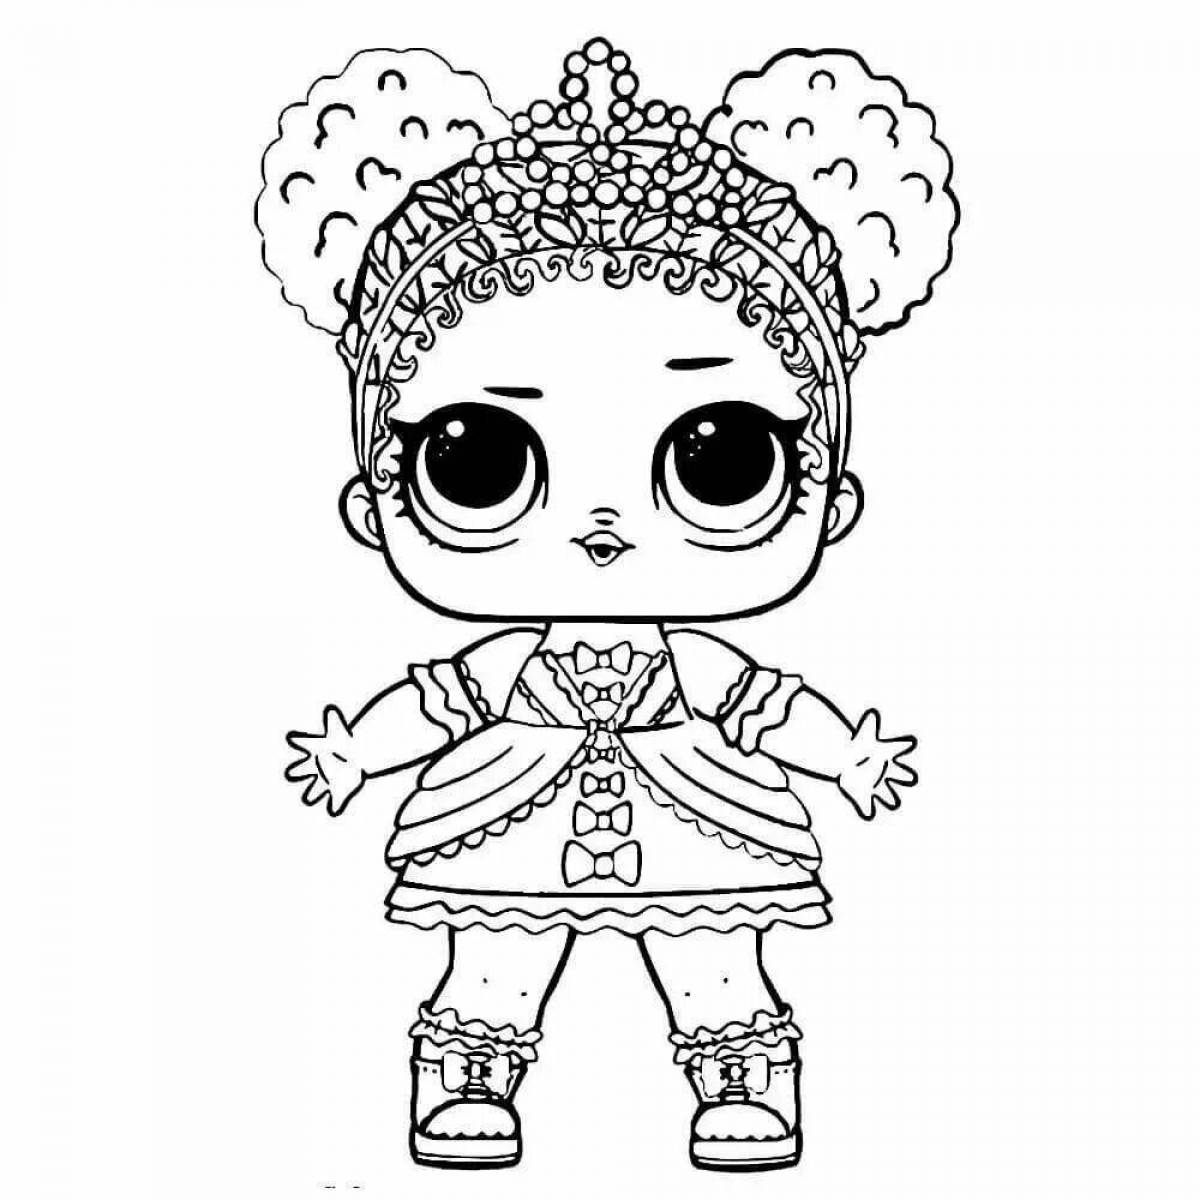 Cute lowe doll coloring book for kids